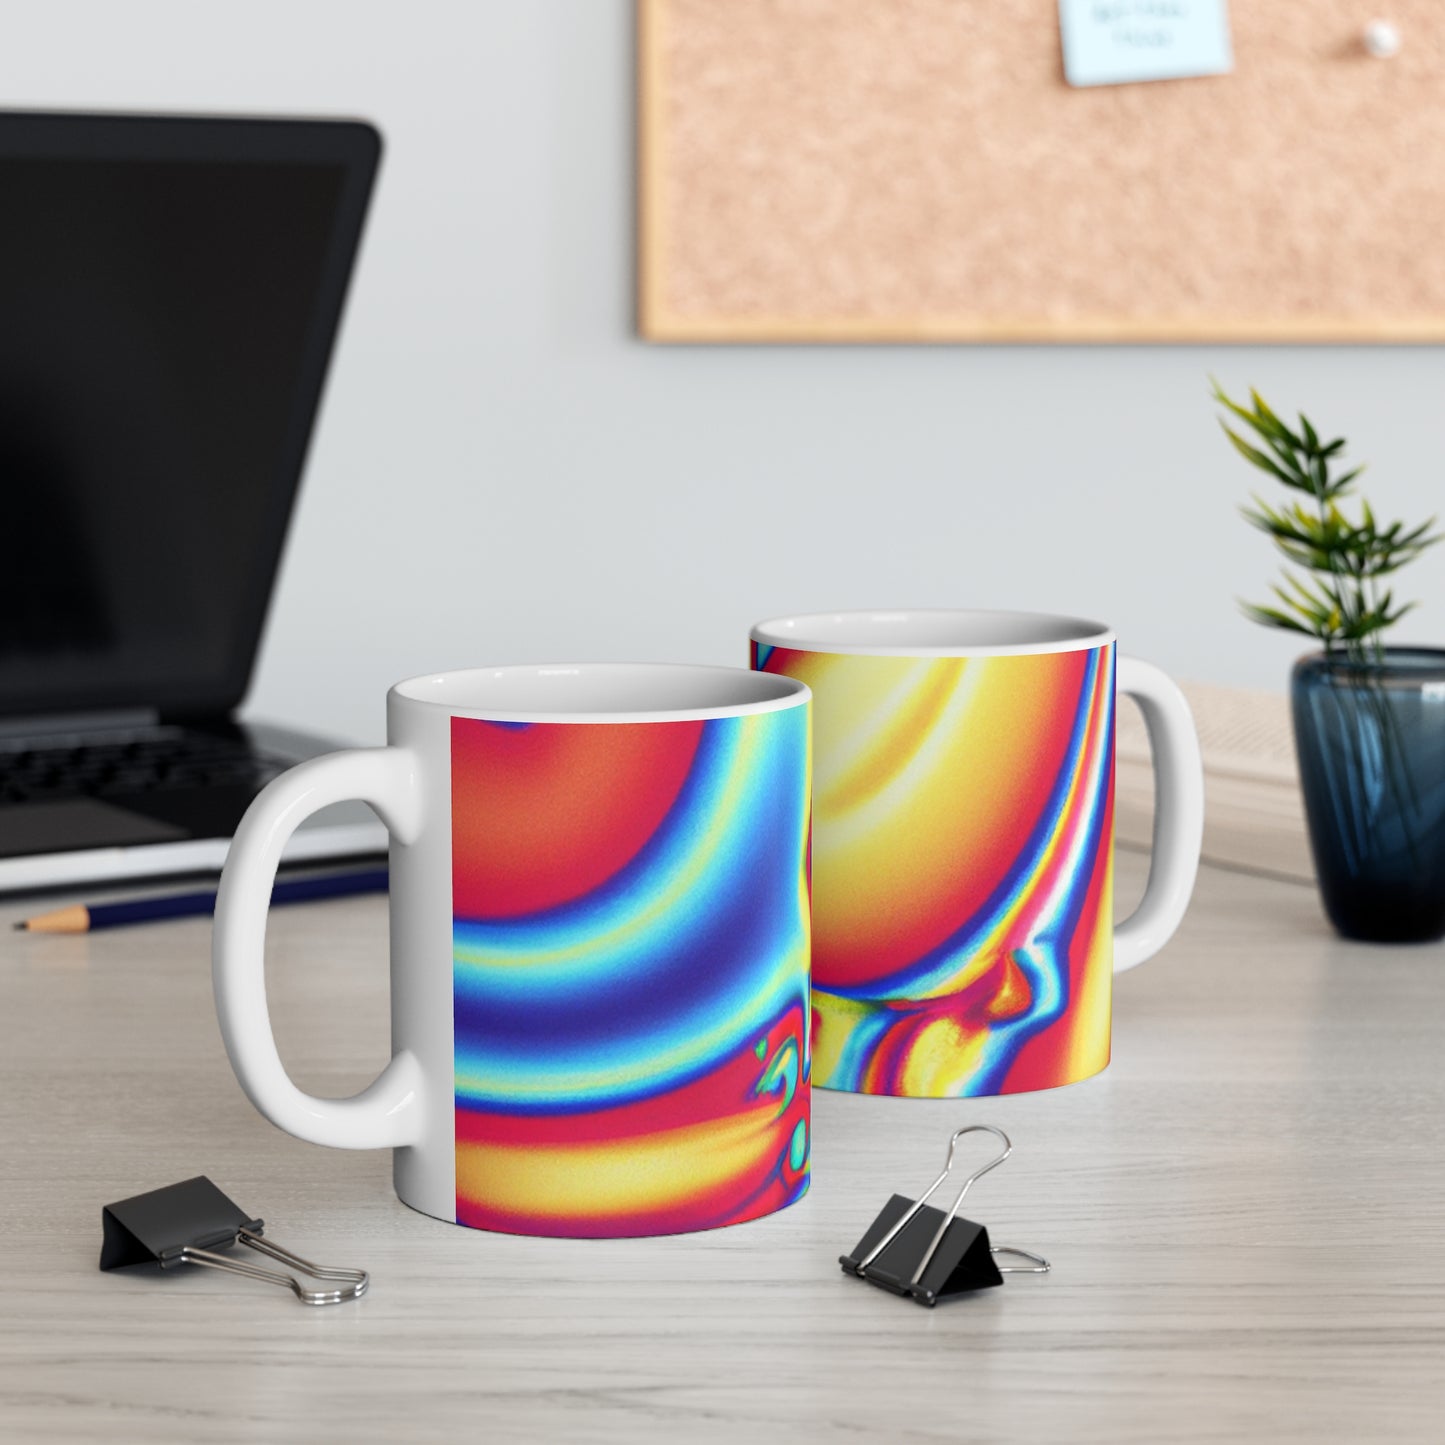 Jodie’s Java - Psychedelic Coffee Cup Mug 11 Ounce